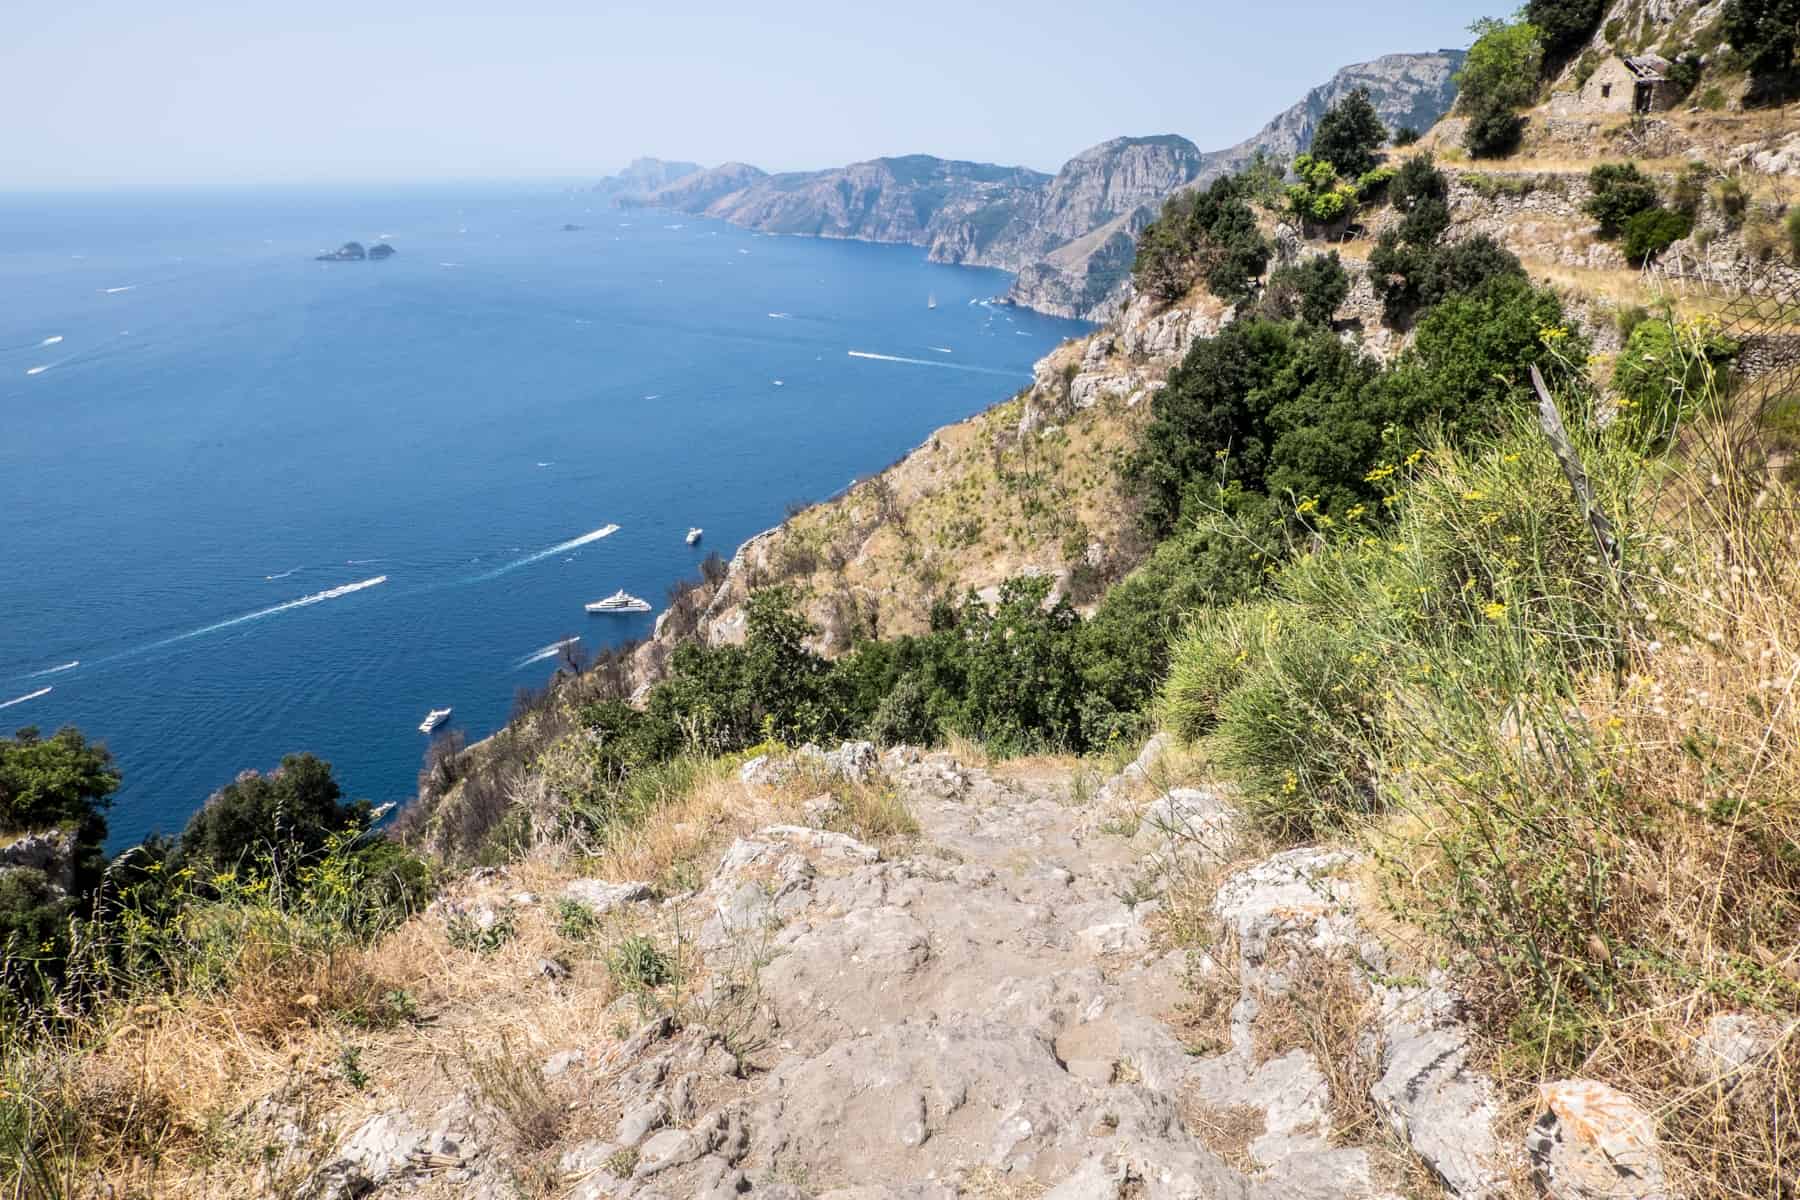 A high rocky pathway on a green clifftop overlooking the sea - part of the Path of the Gods hike in Amalfi, Italy. 